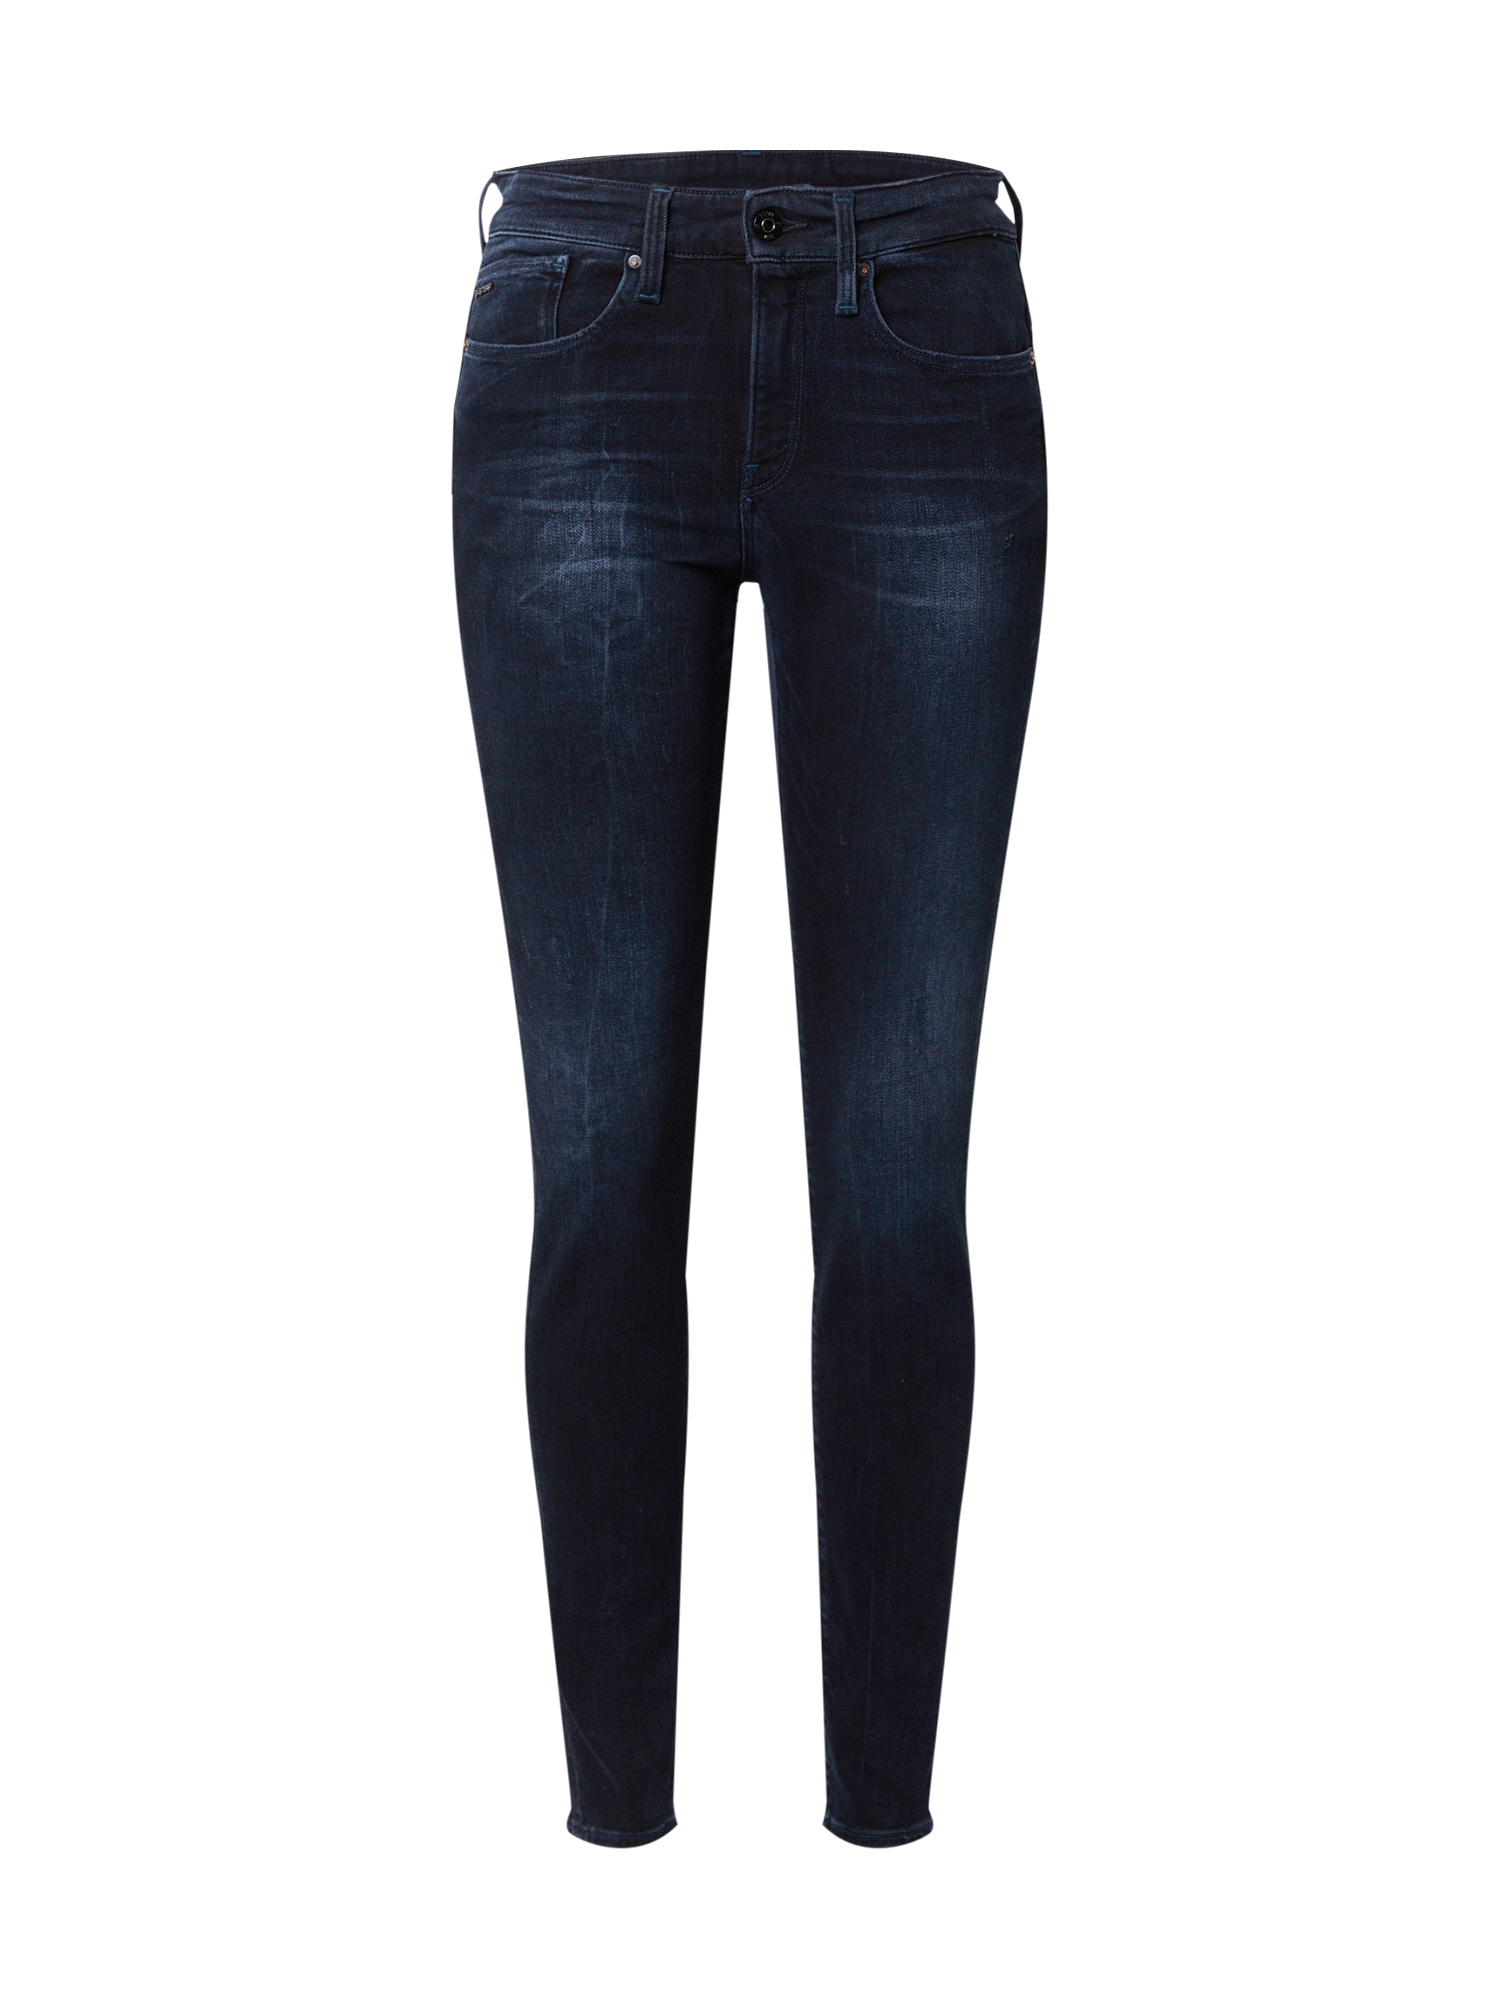 Donna PROMO G-Star RAW Jeans Lhana in Blu Scuro 